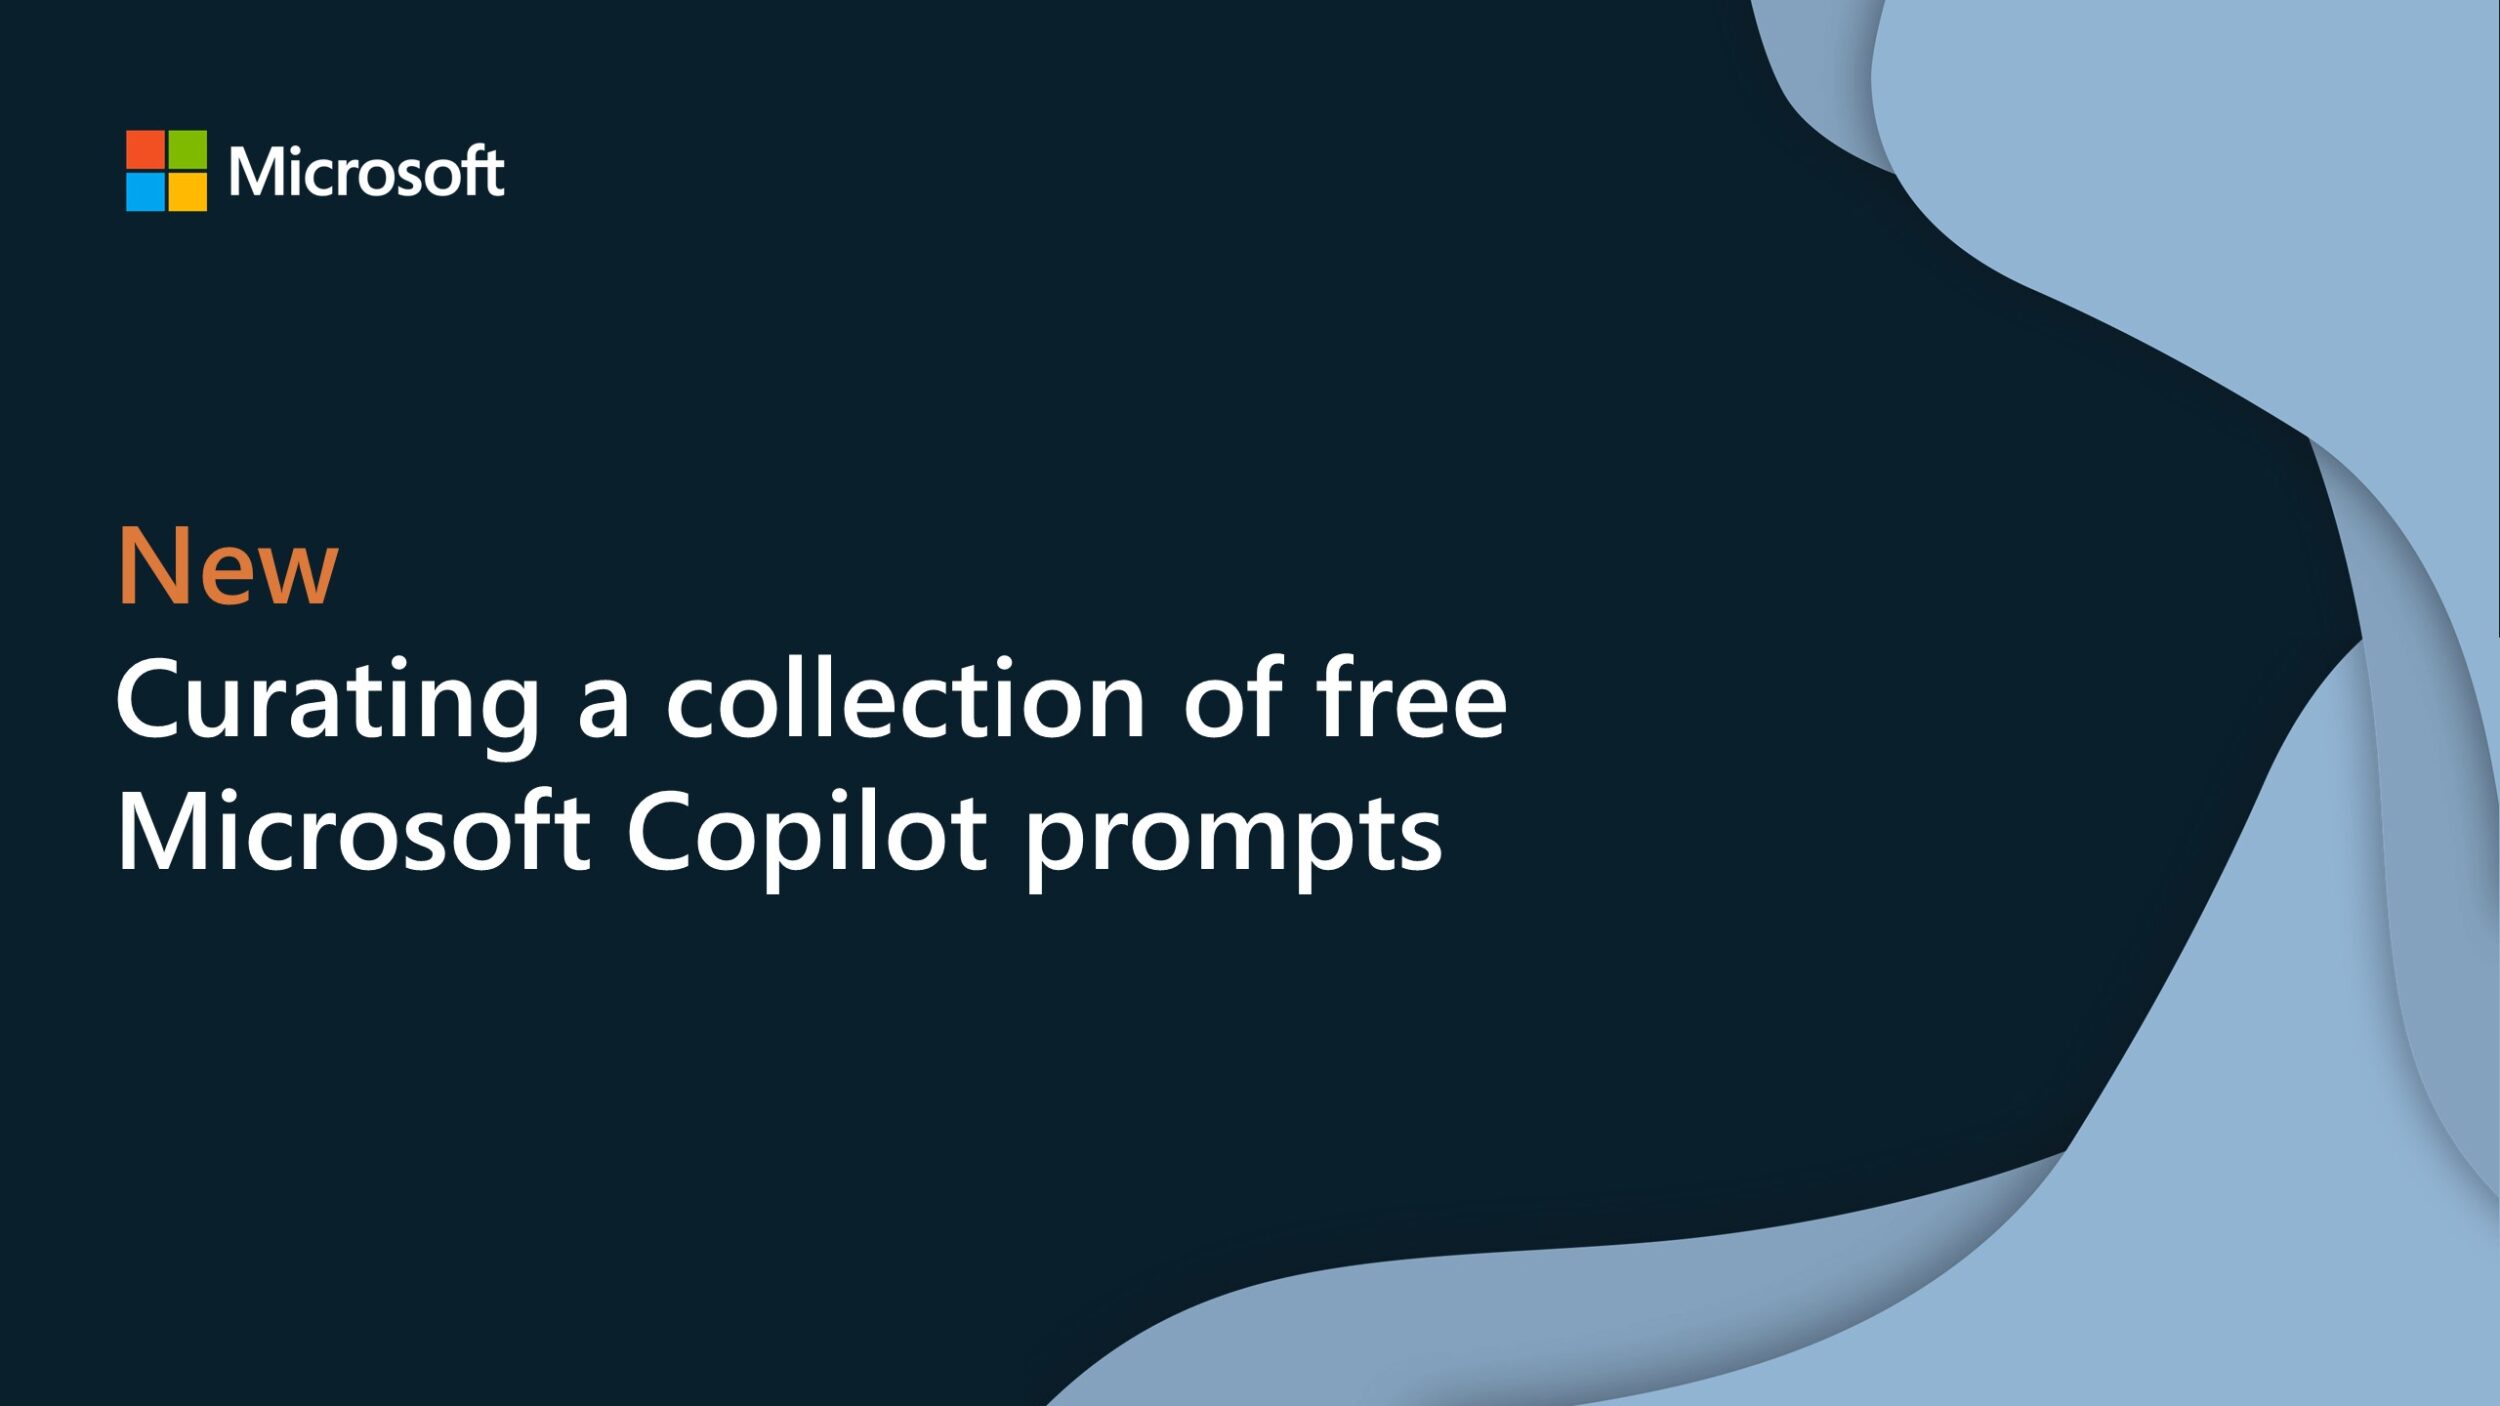 Curating a collection of free Microsoft Copilot prompts